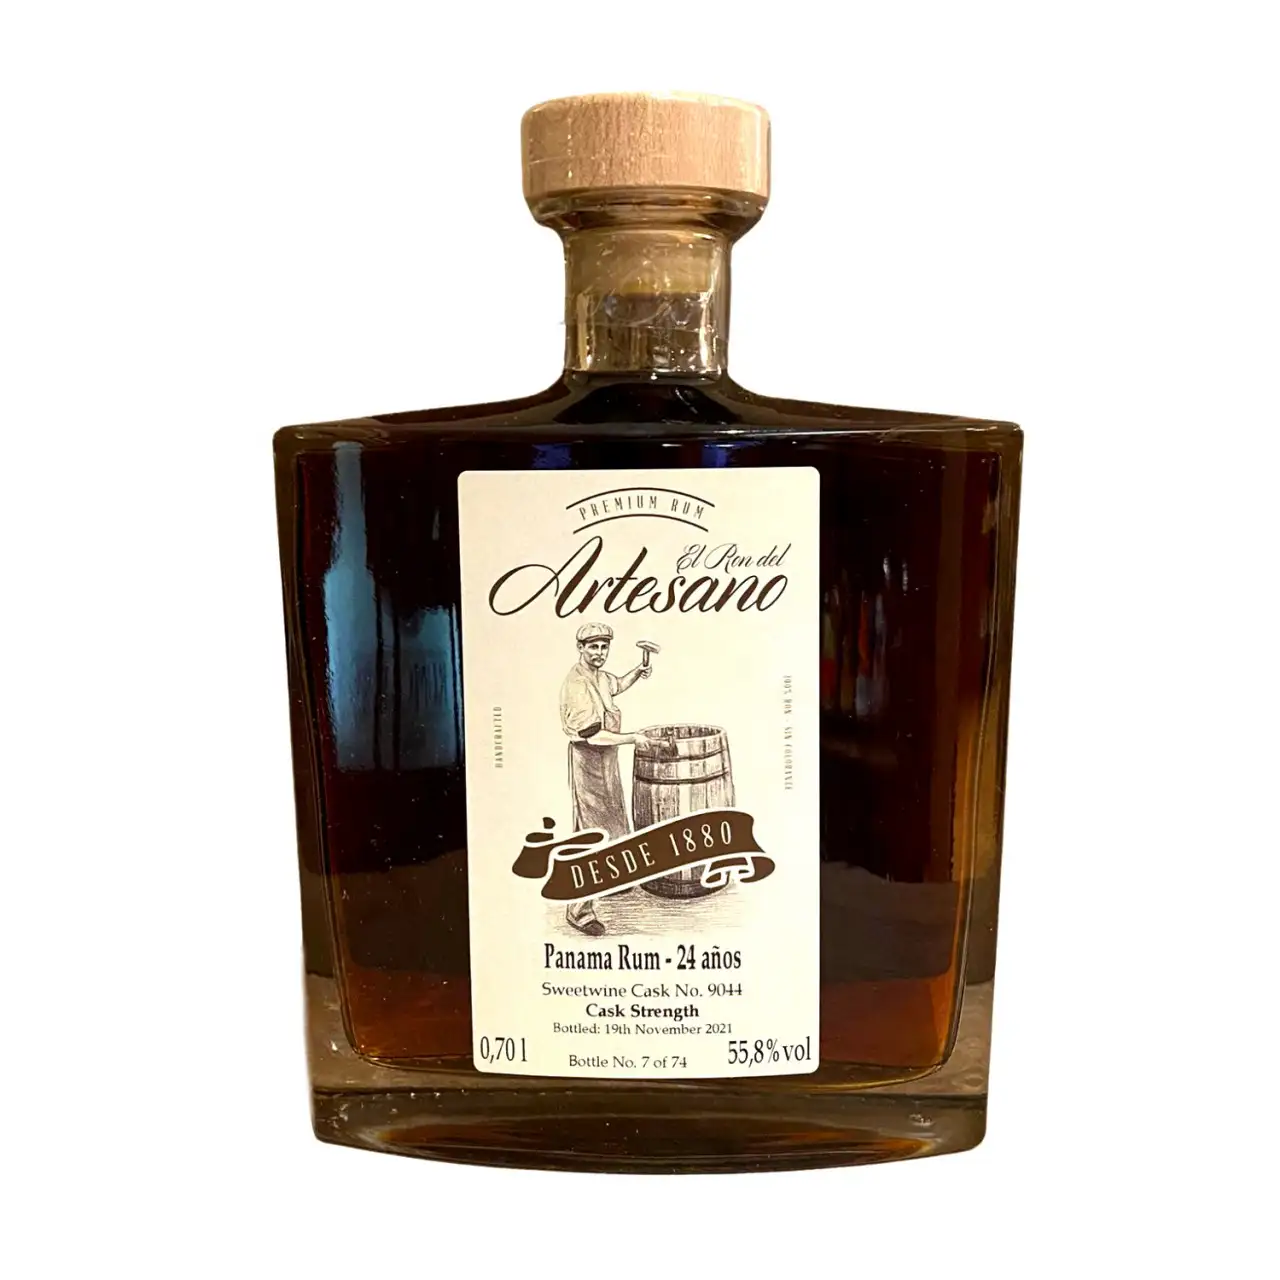 Image of the front of the bottle of the rum Panama Rum - Sweetwine Cask